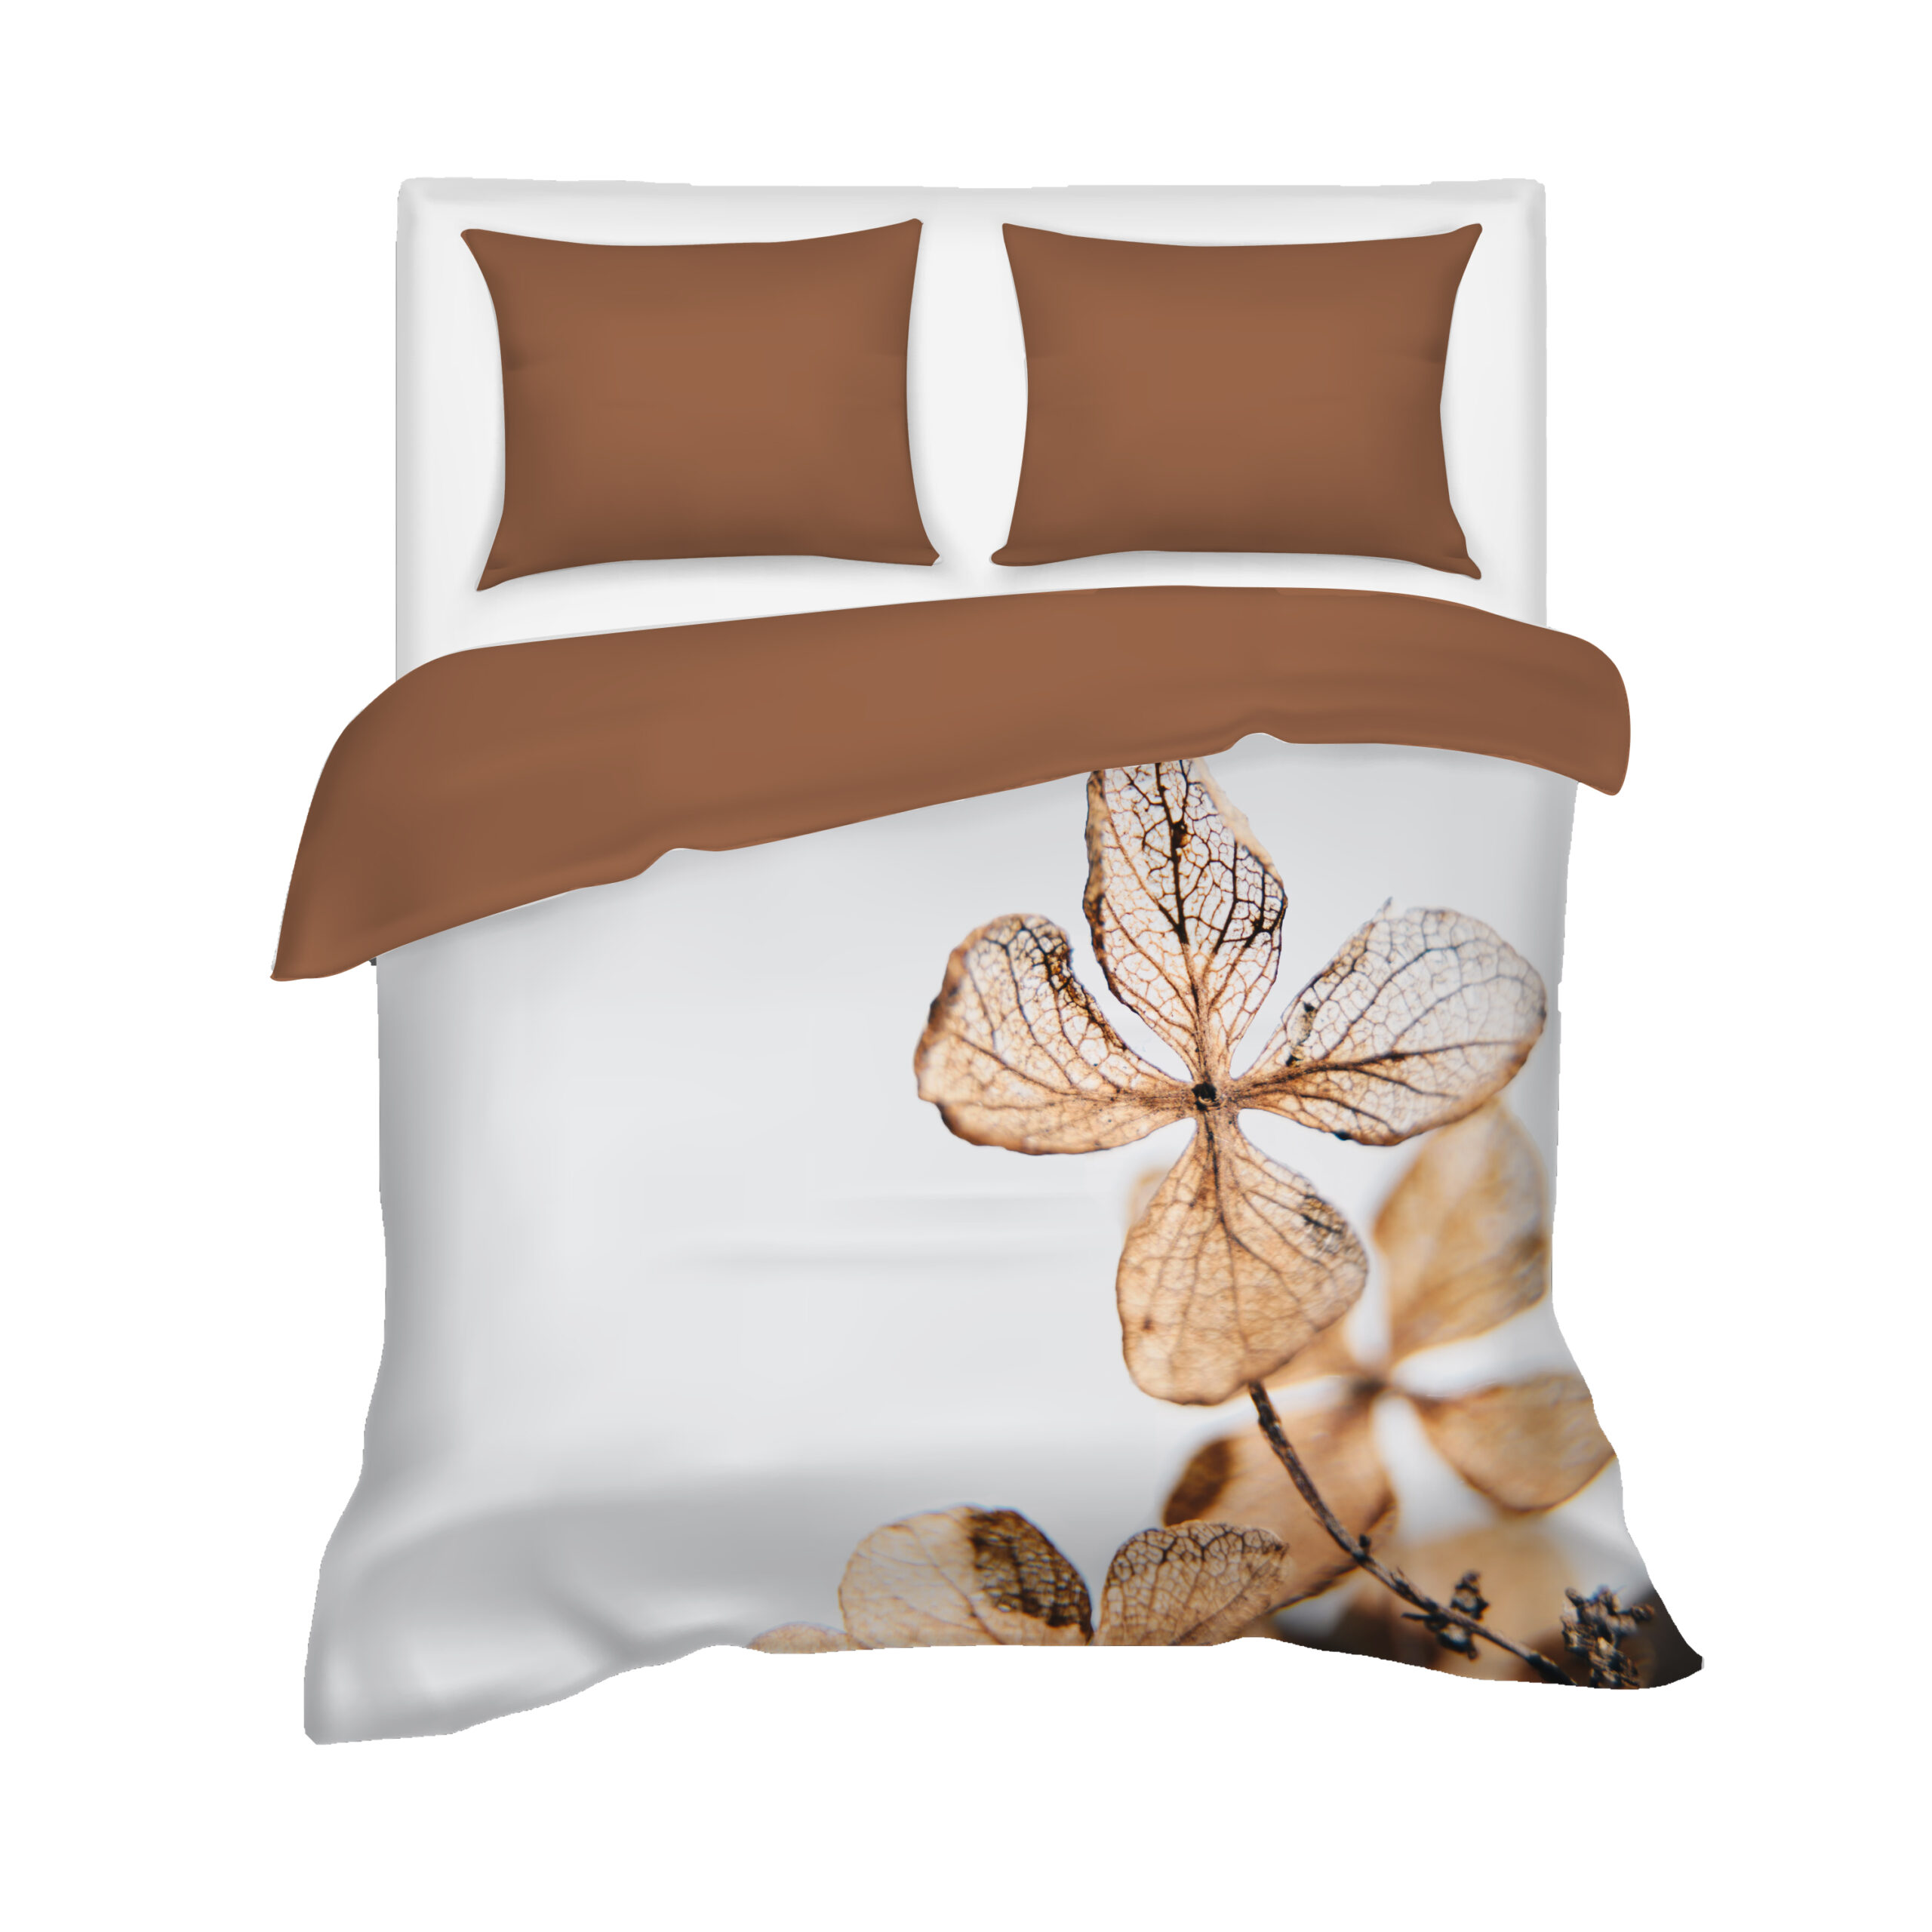 Villa Madelief 200 x 220cm Brown White Dry Flower Printed Duvet Cover with 2 Pillowcases